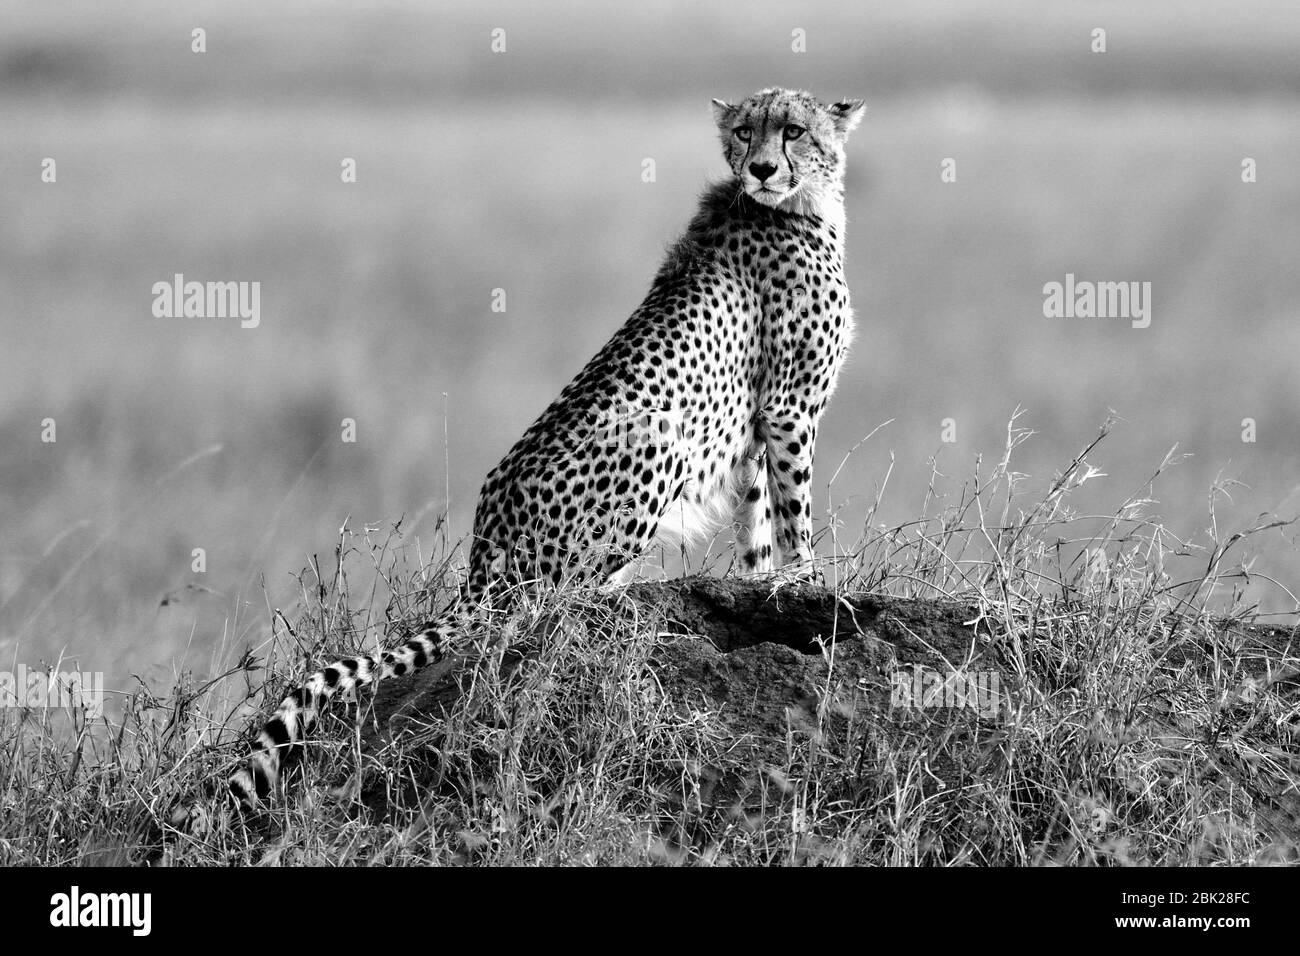 Cheetah Black and White Stock Photos & Images - Alamy